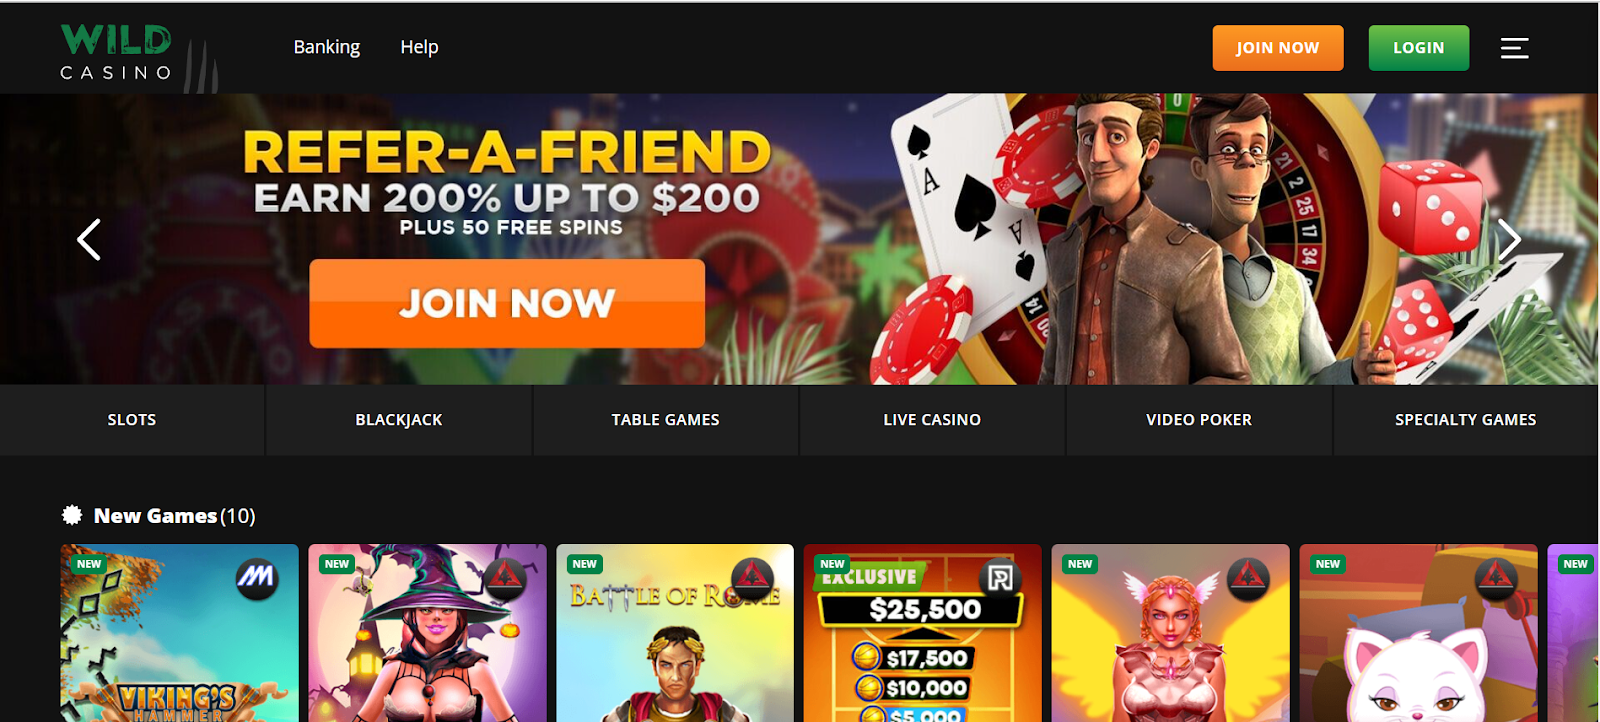 The Top Strategies for Successful Blackjack at Wild Casino Online